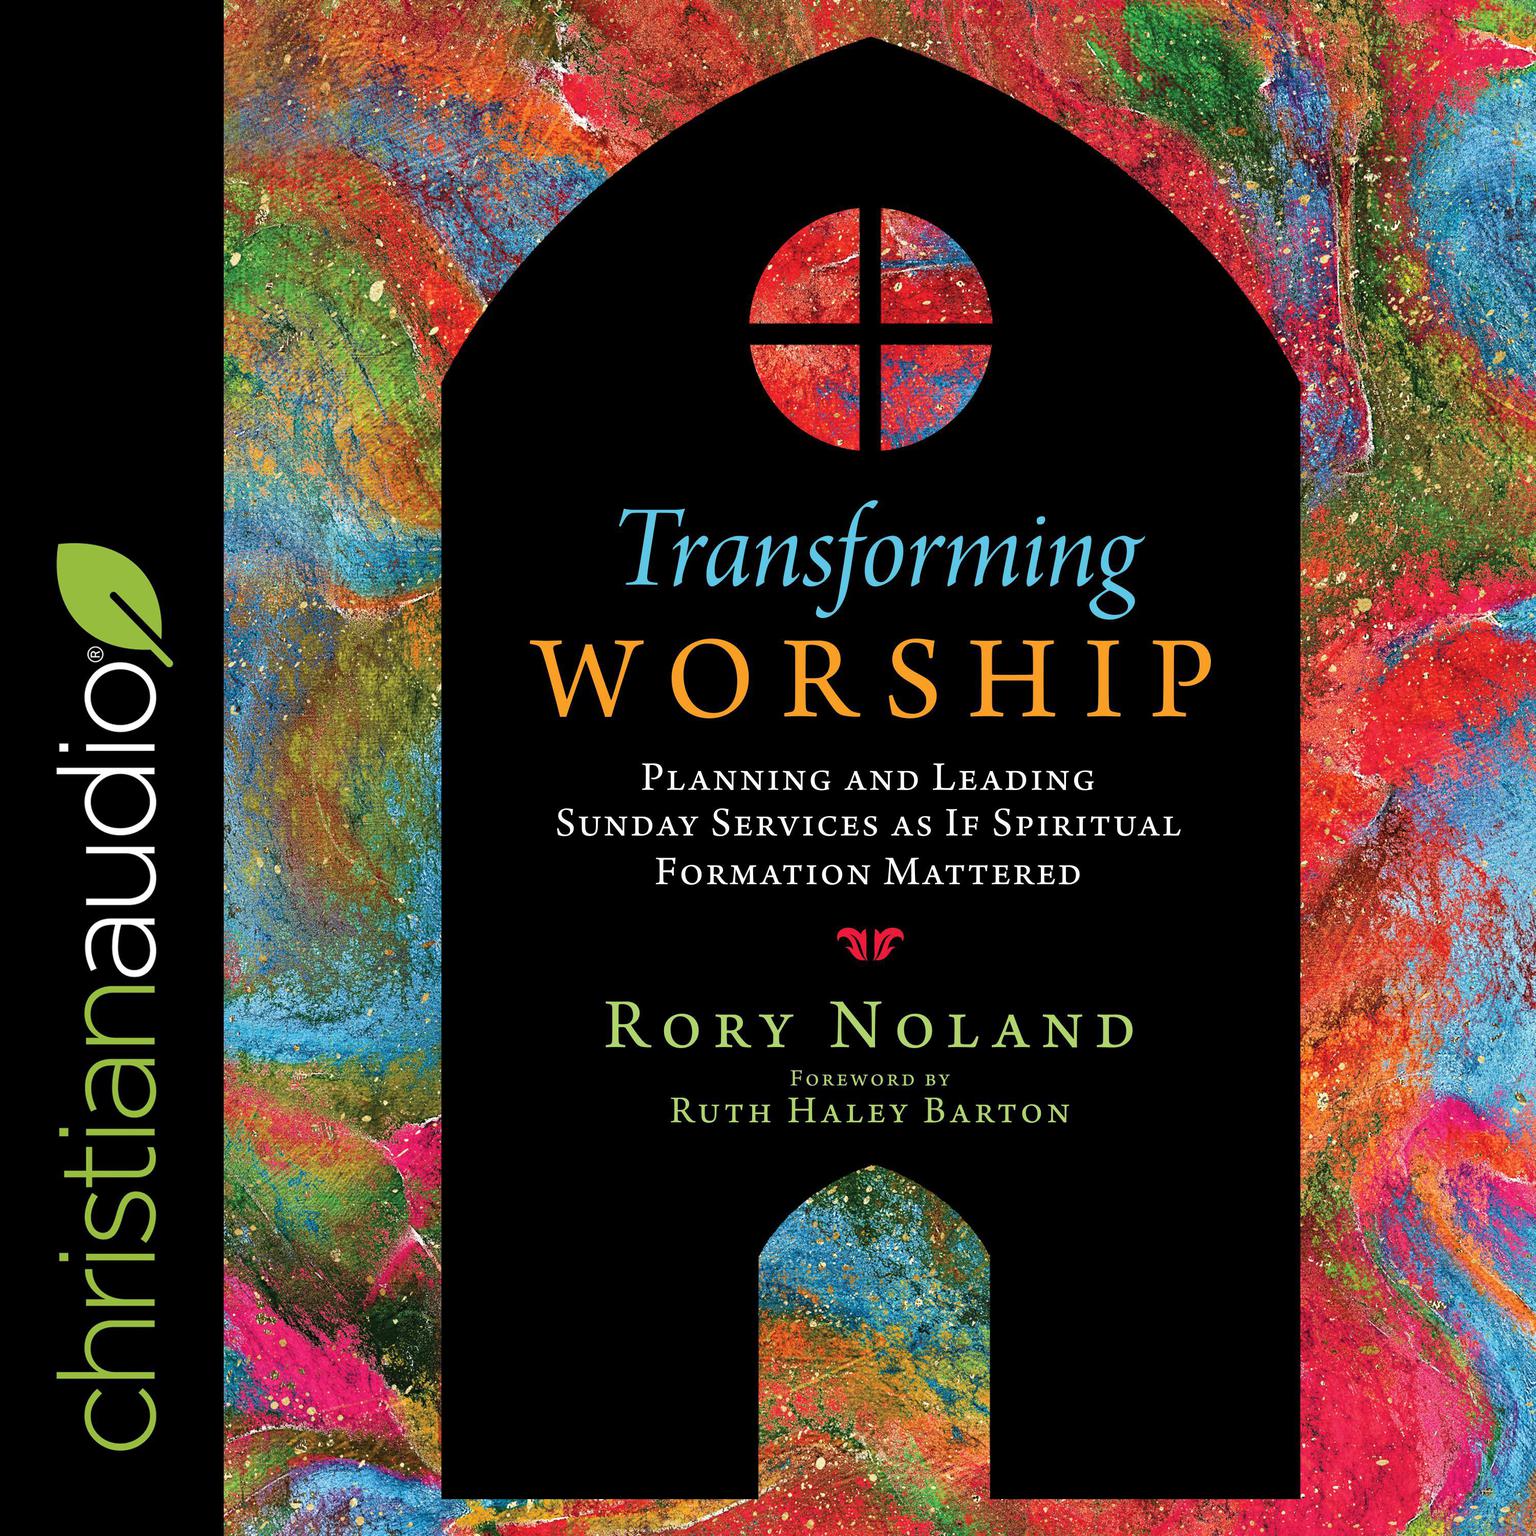 Transforming Worship: Planning and Leading Sunday Services as If Spiritual Formation Mattered Audiobook, by Rory Noland